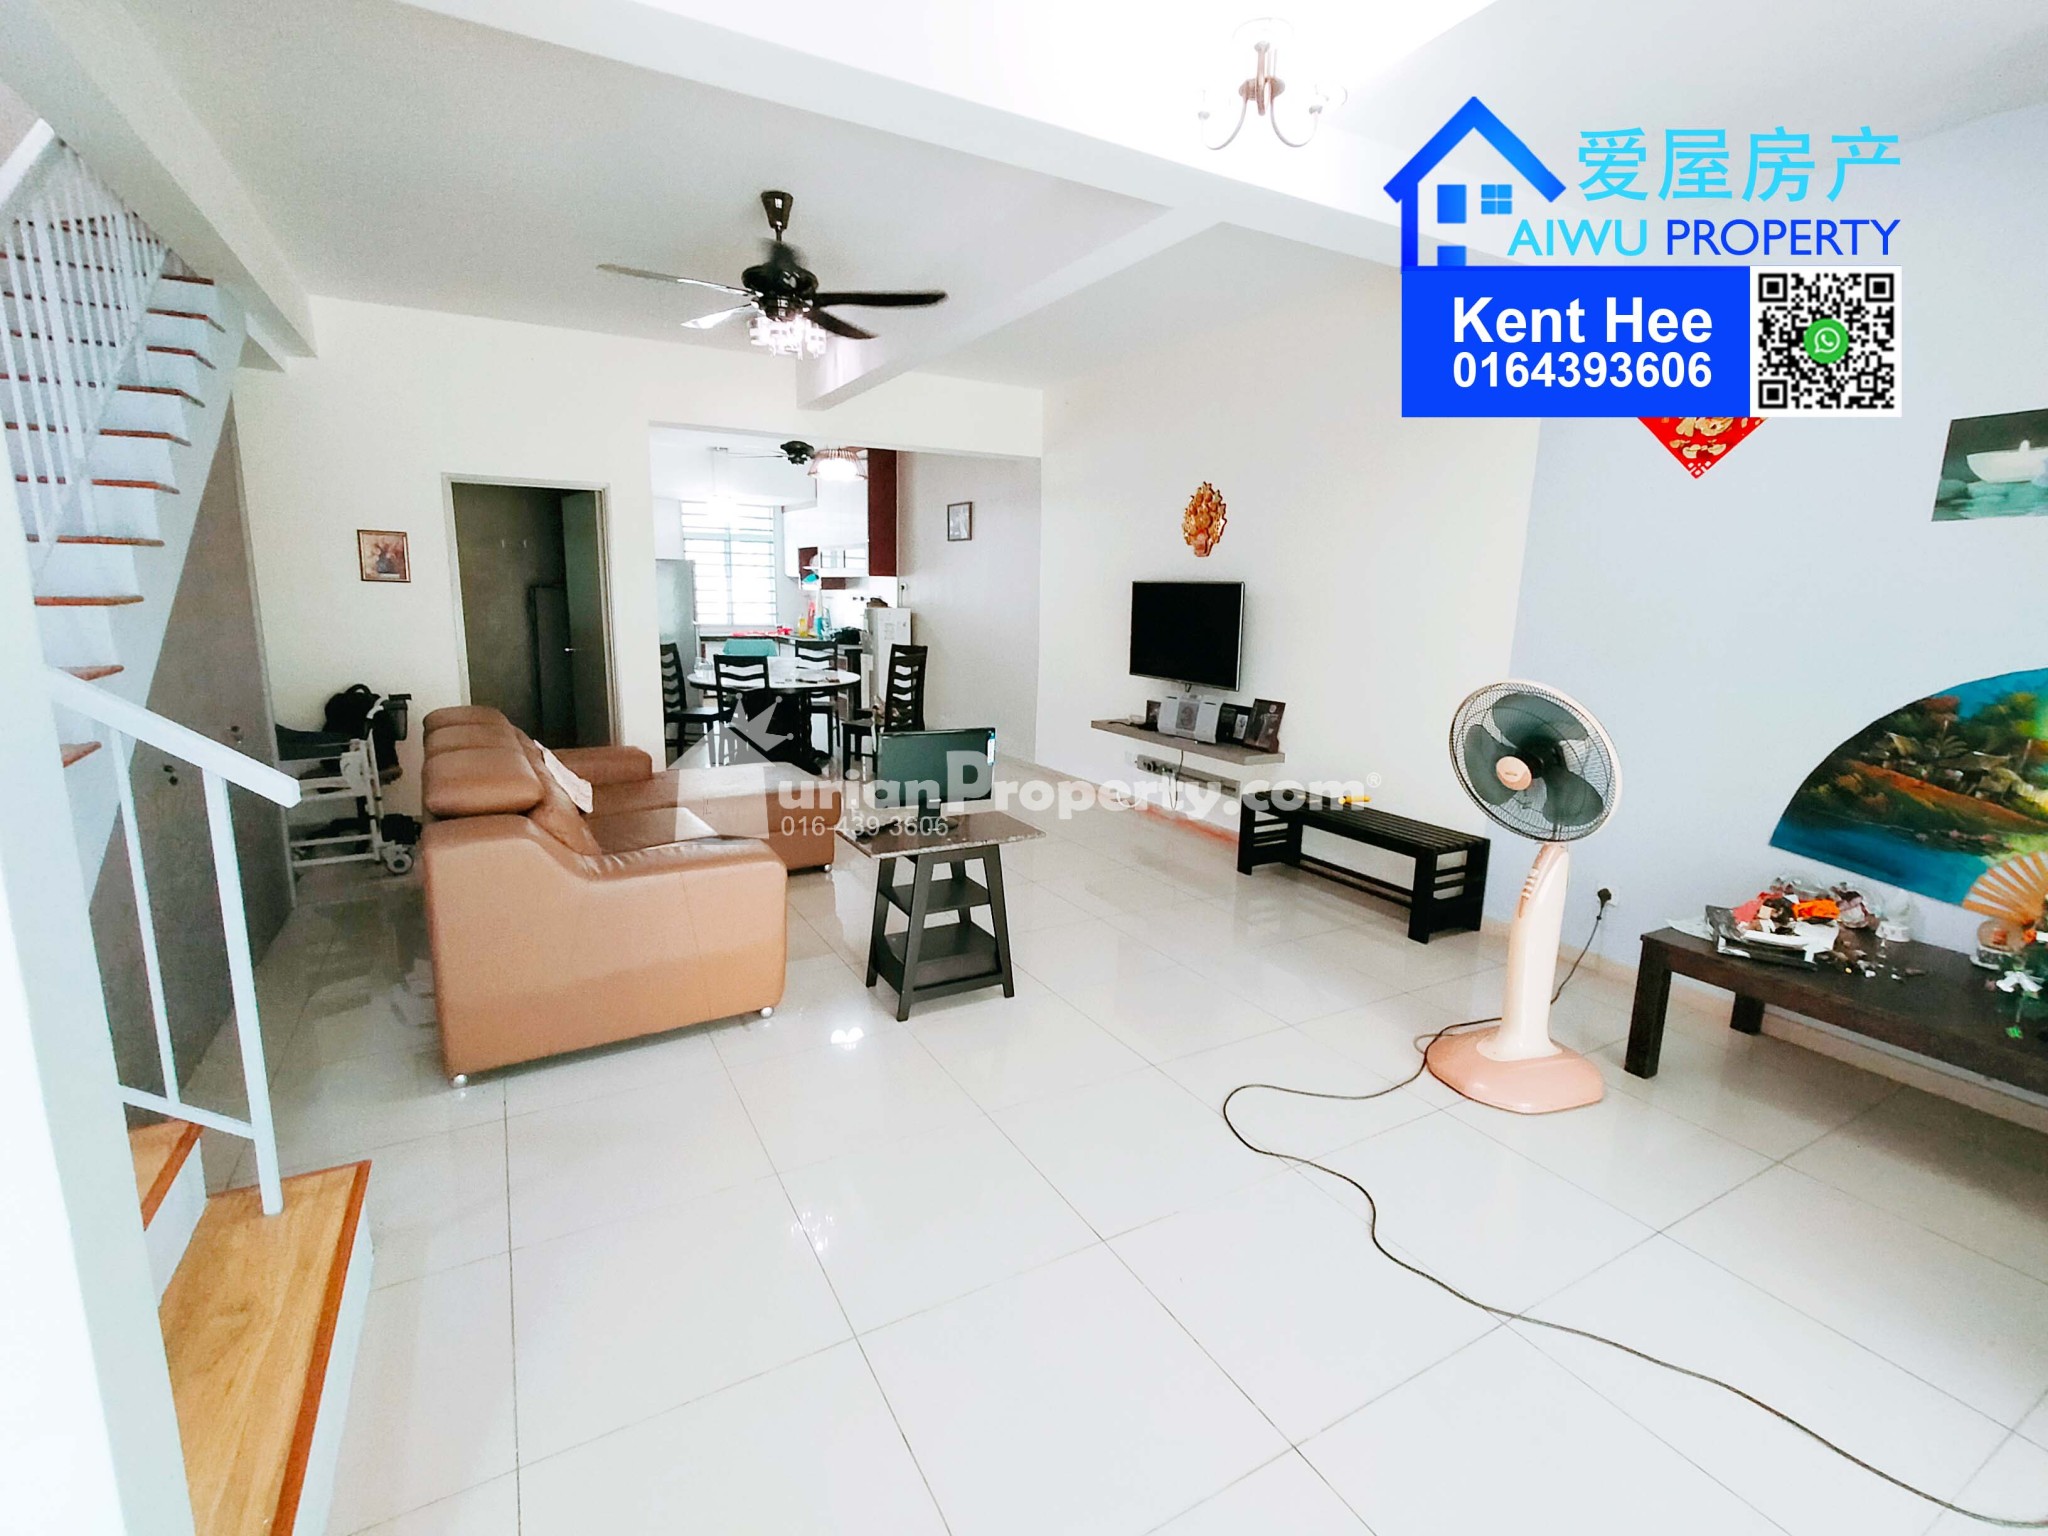 Terrace House For Rent at Taman Titi Heights